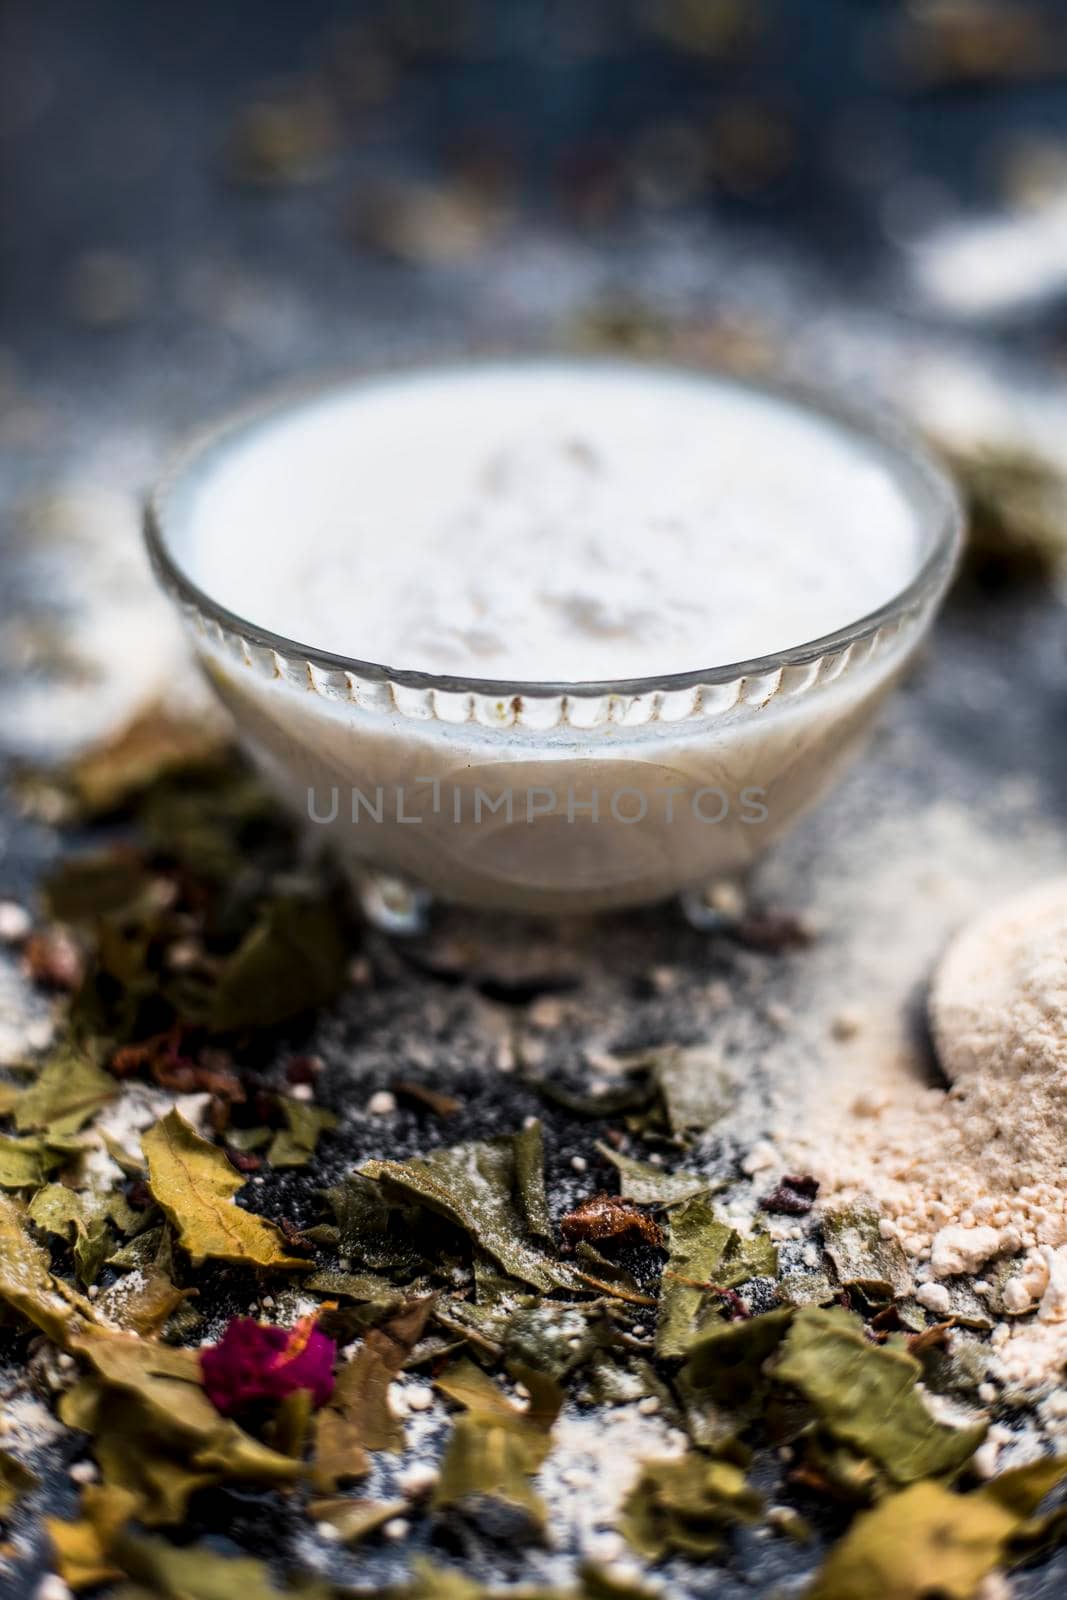 Neem or Indian Lilac face mask on the black wooden surface for acne and scars consisting of gram flour, neem paste, and some curd. by mirzamlk